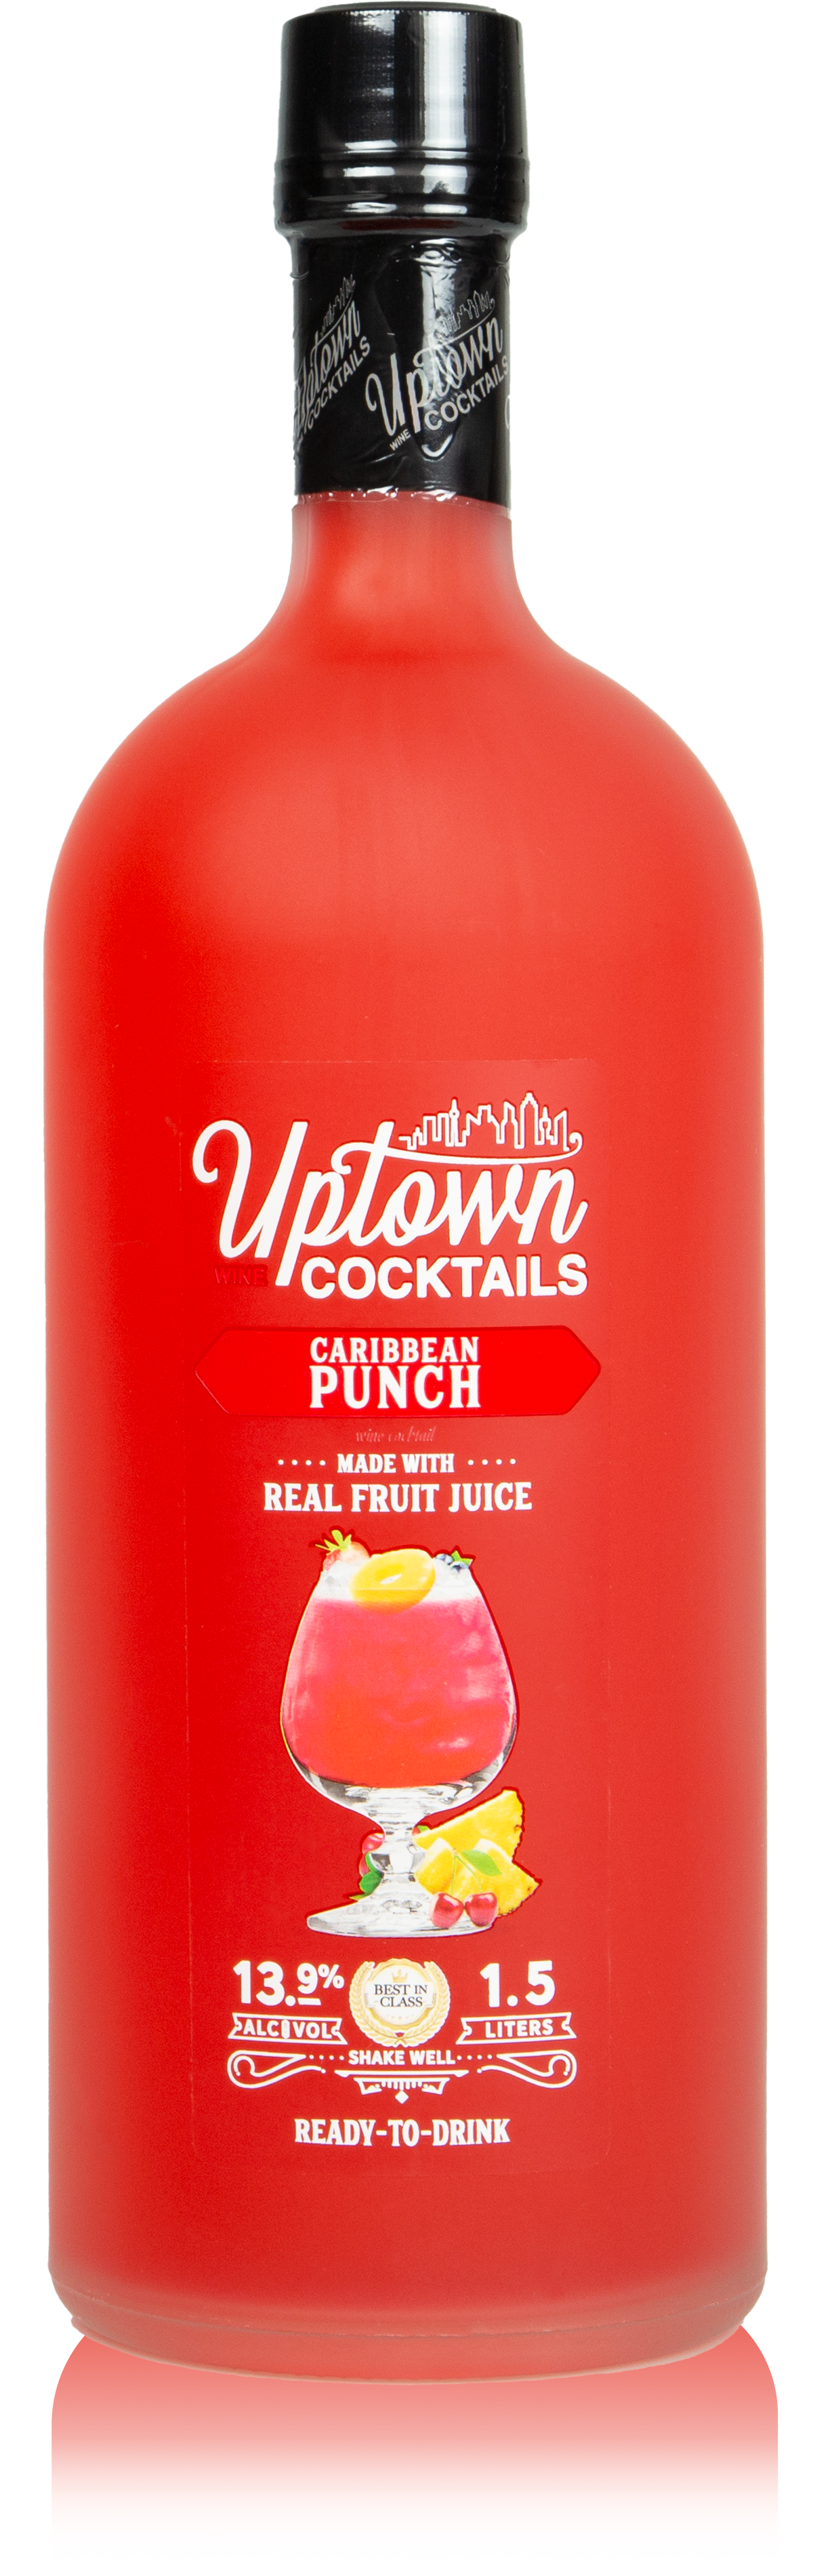 Product Image for Caribbean Punch